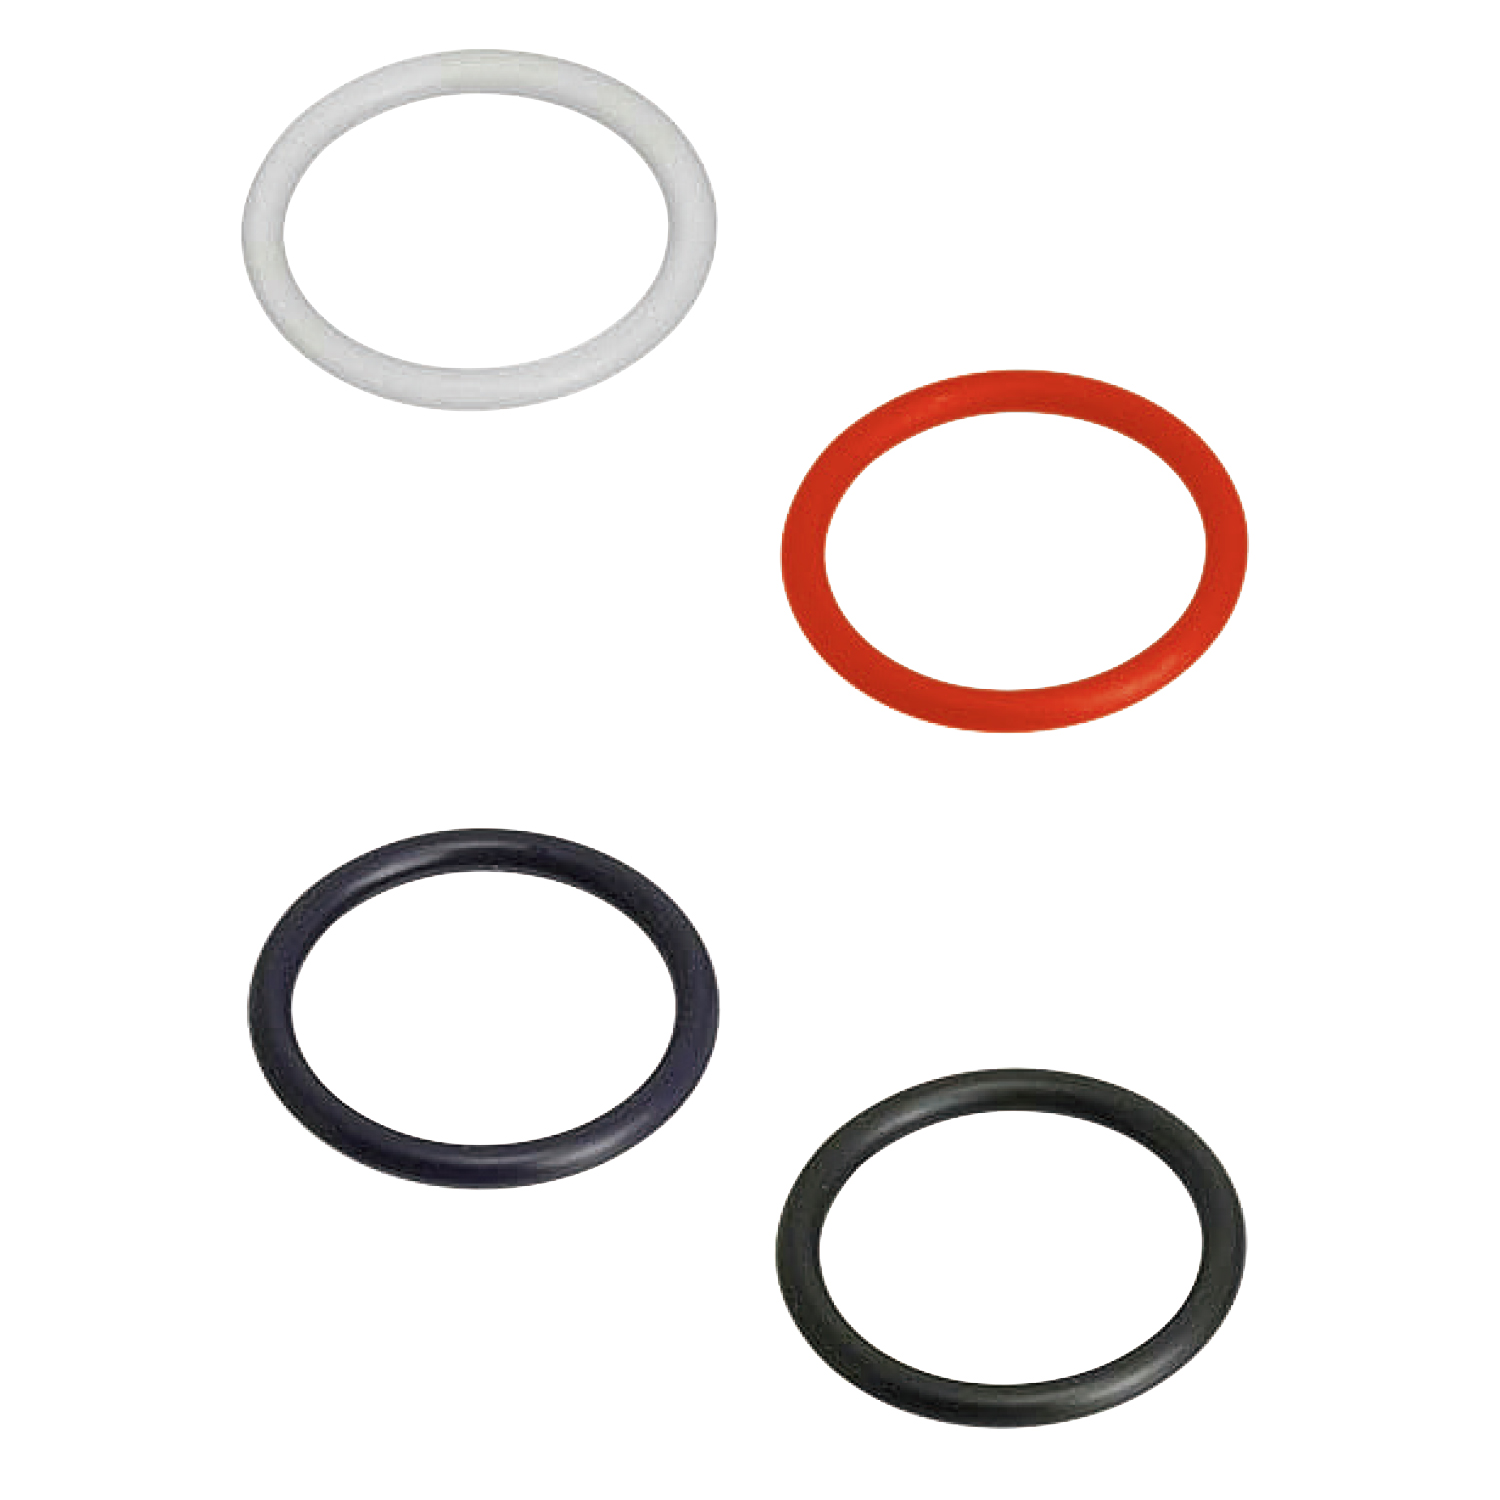 O-Rings - for Static Applications, G Series